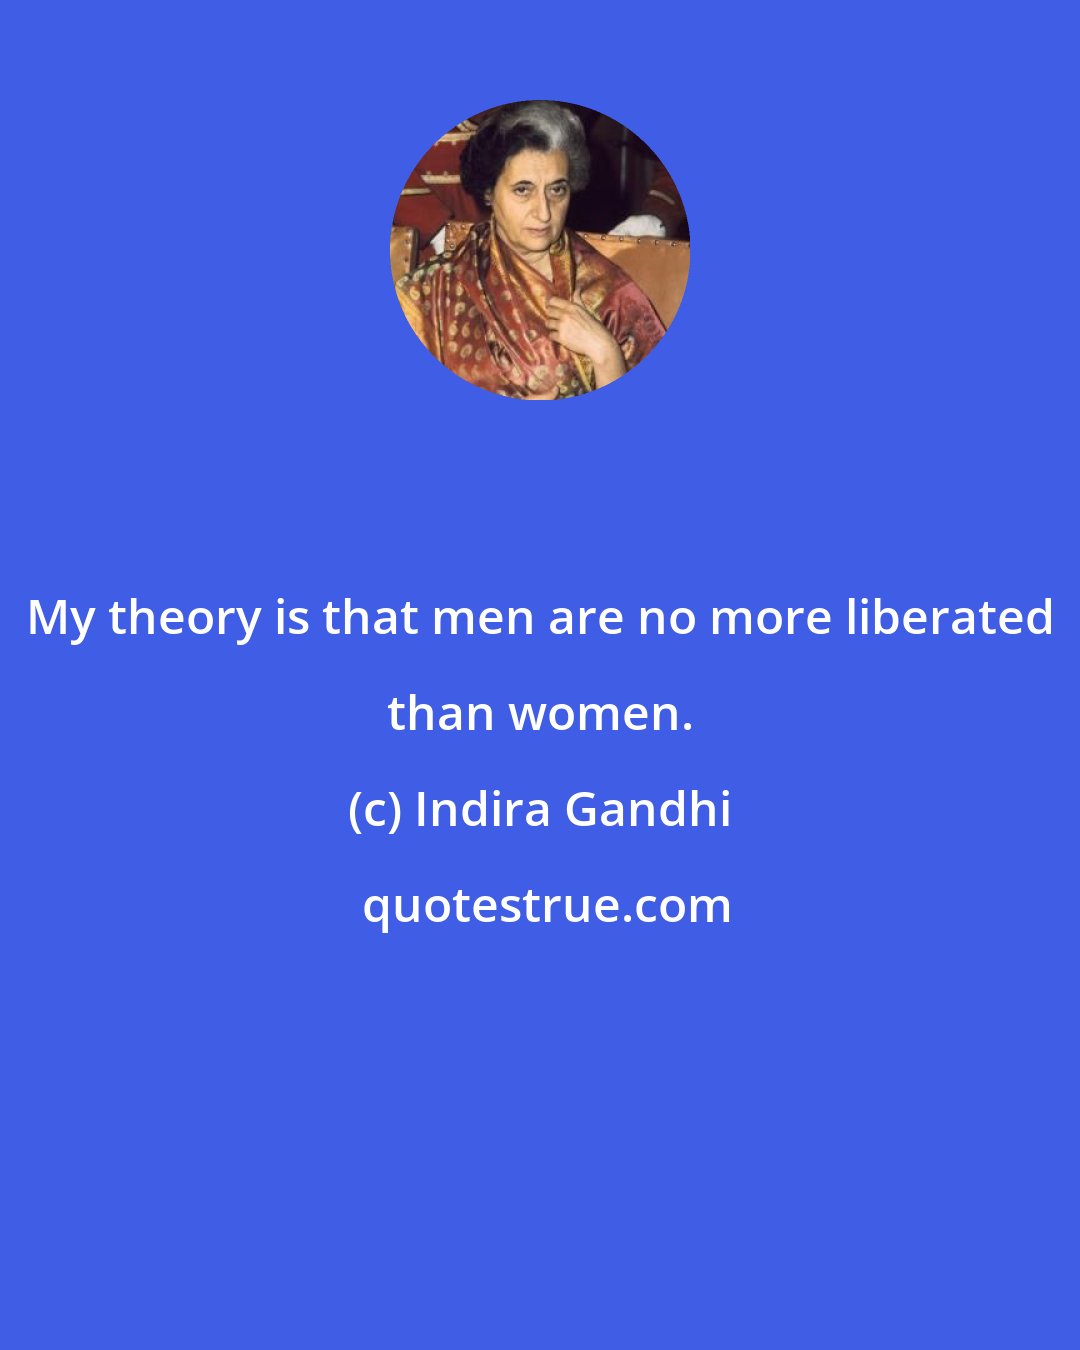 Indira Gandhi: My theory is that men are no more liberated than women.